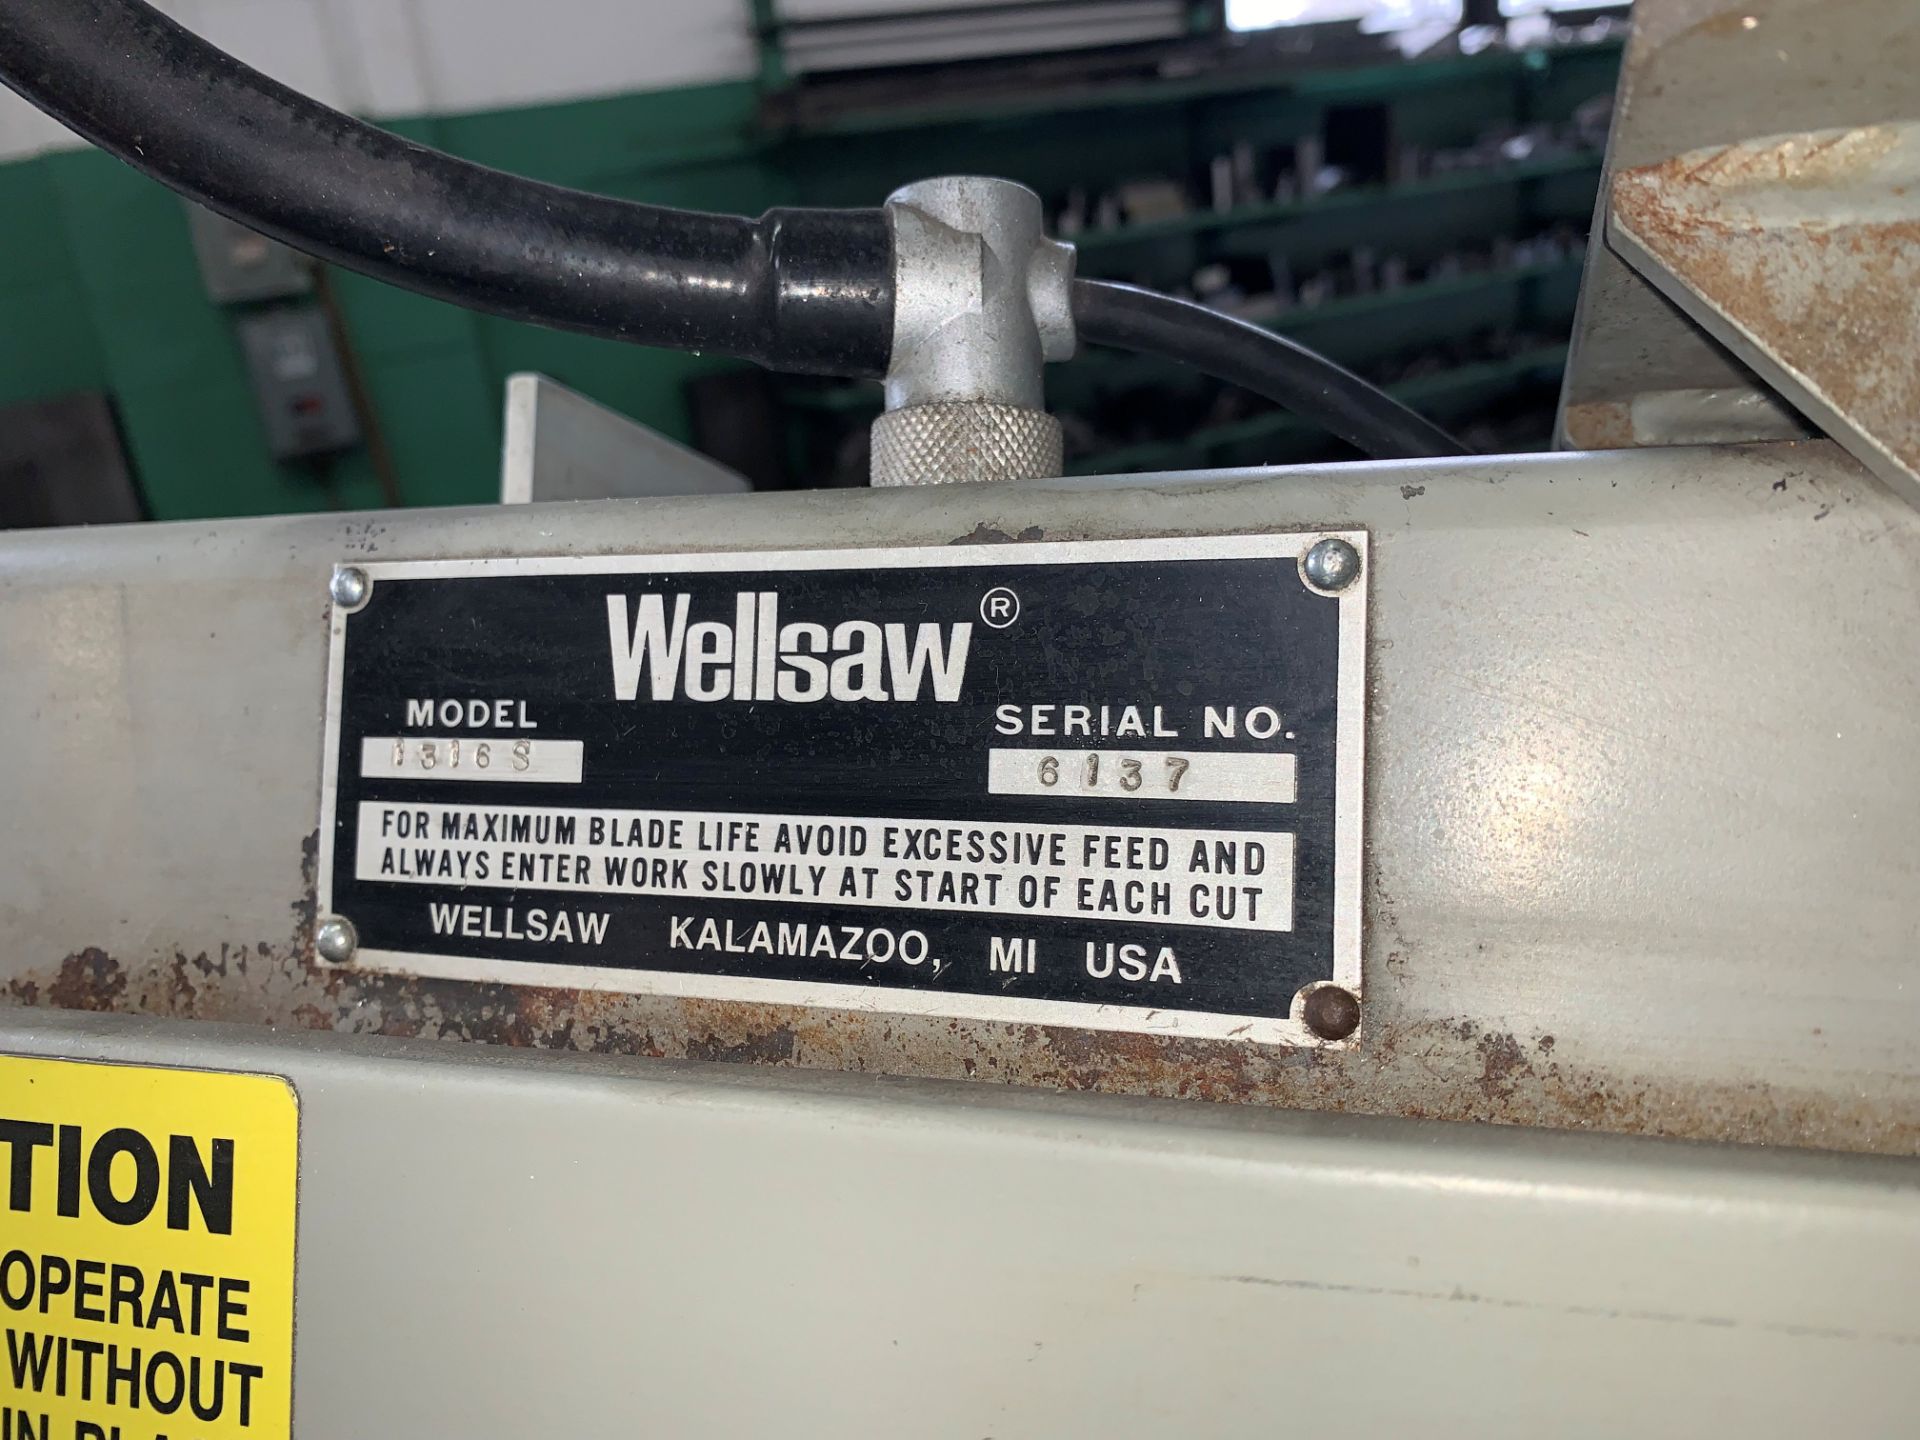 Wellsaw Model 1316 S, 13" x 16" Horizontal Mitering Head Metal Cutting Band Saw - Image 4 of 4